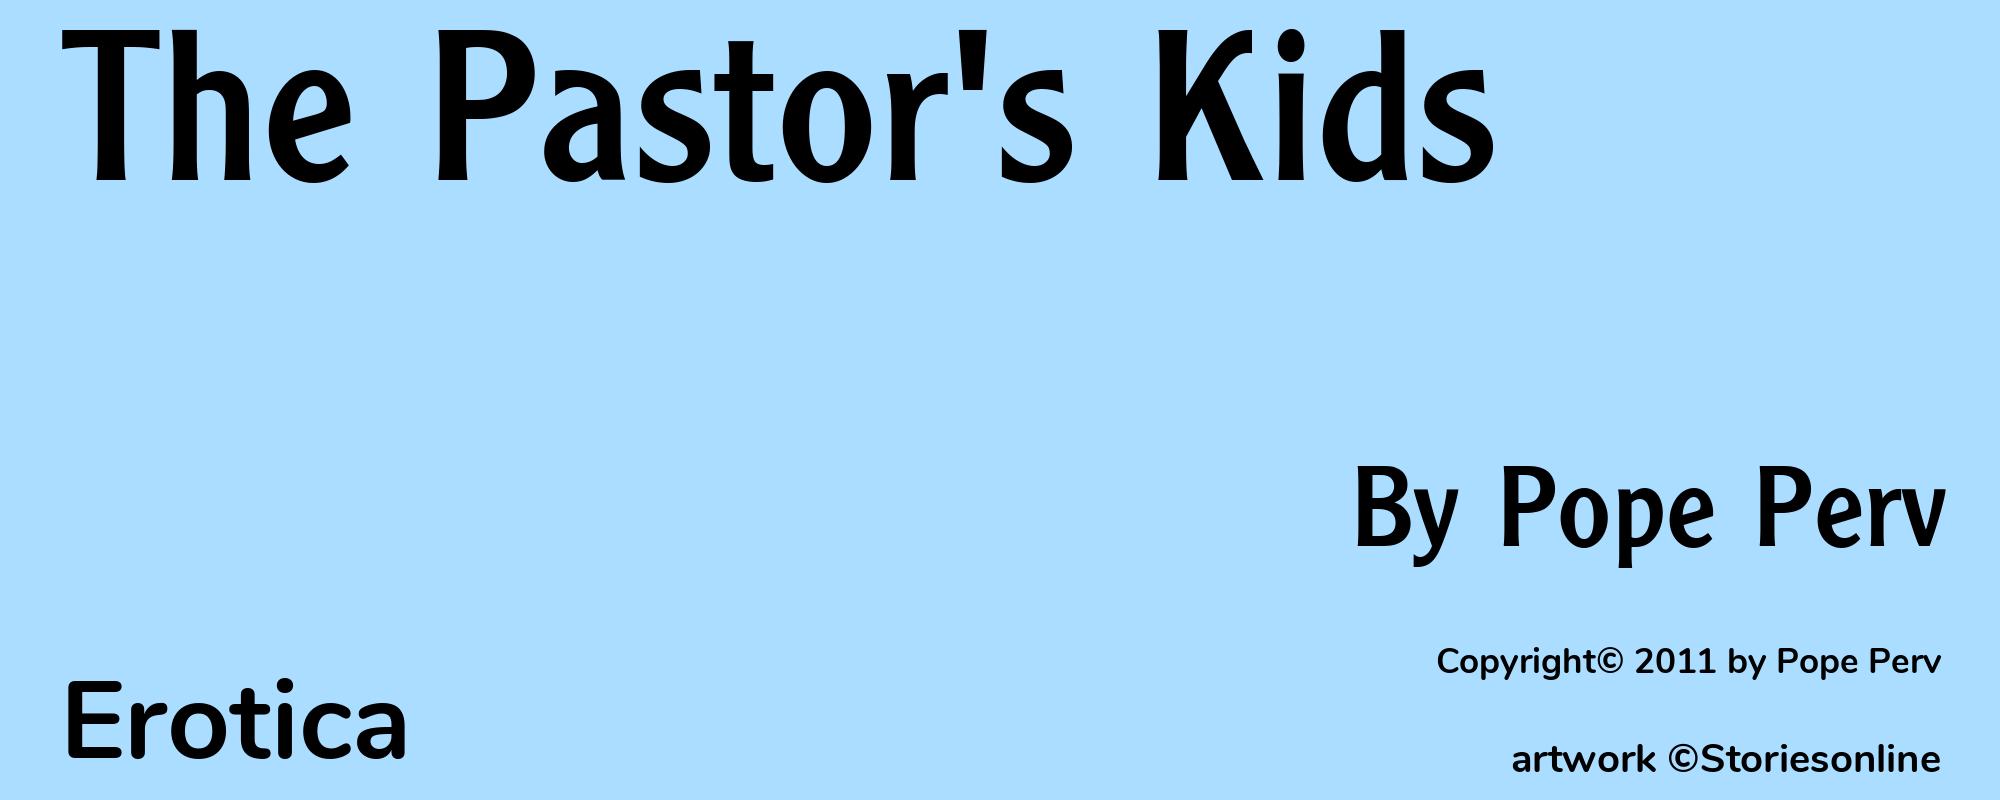 The Pastor's Kids - Cover